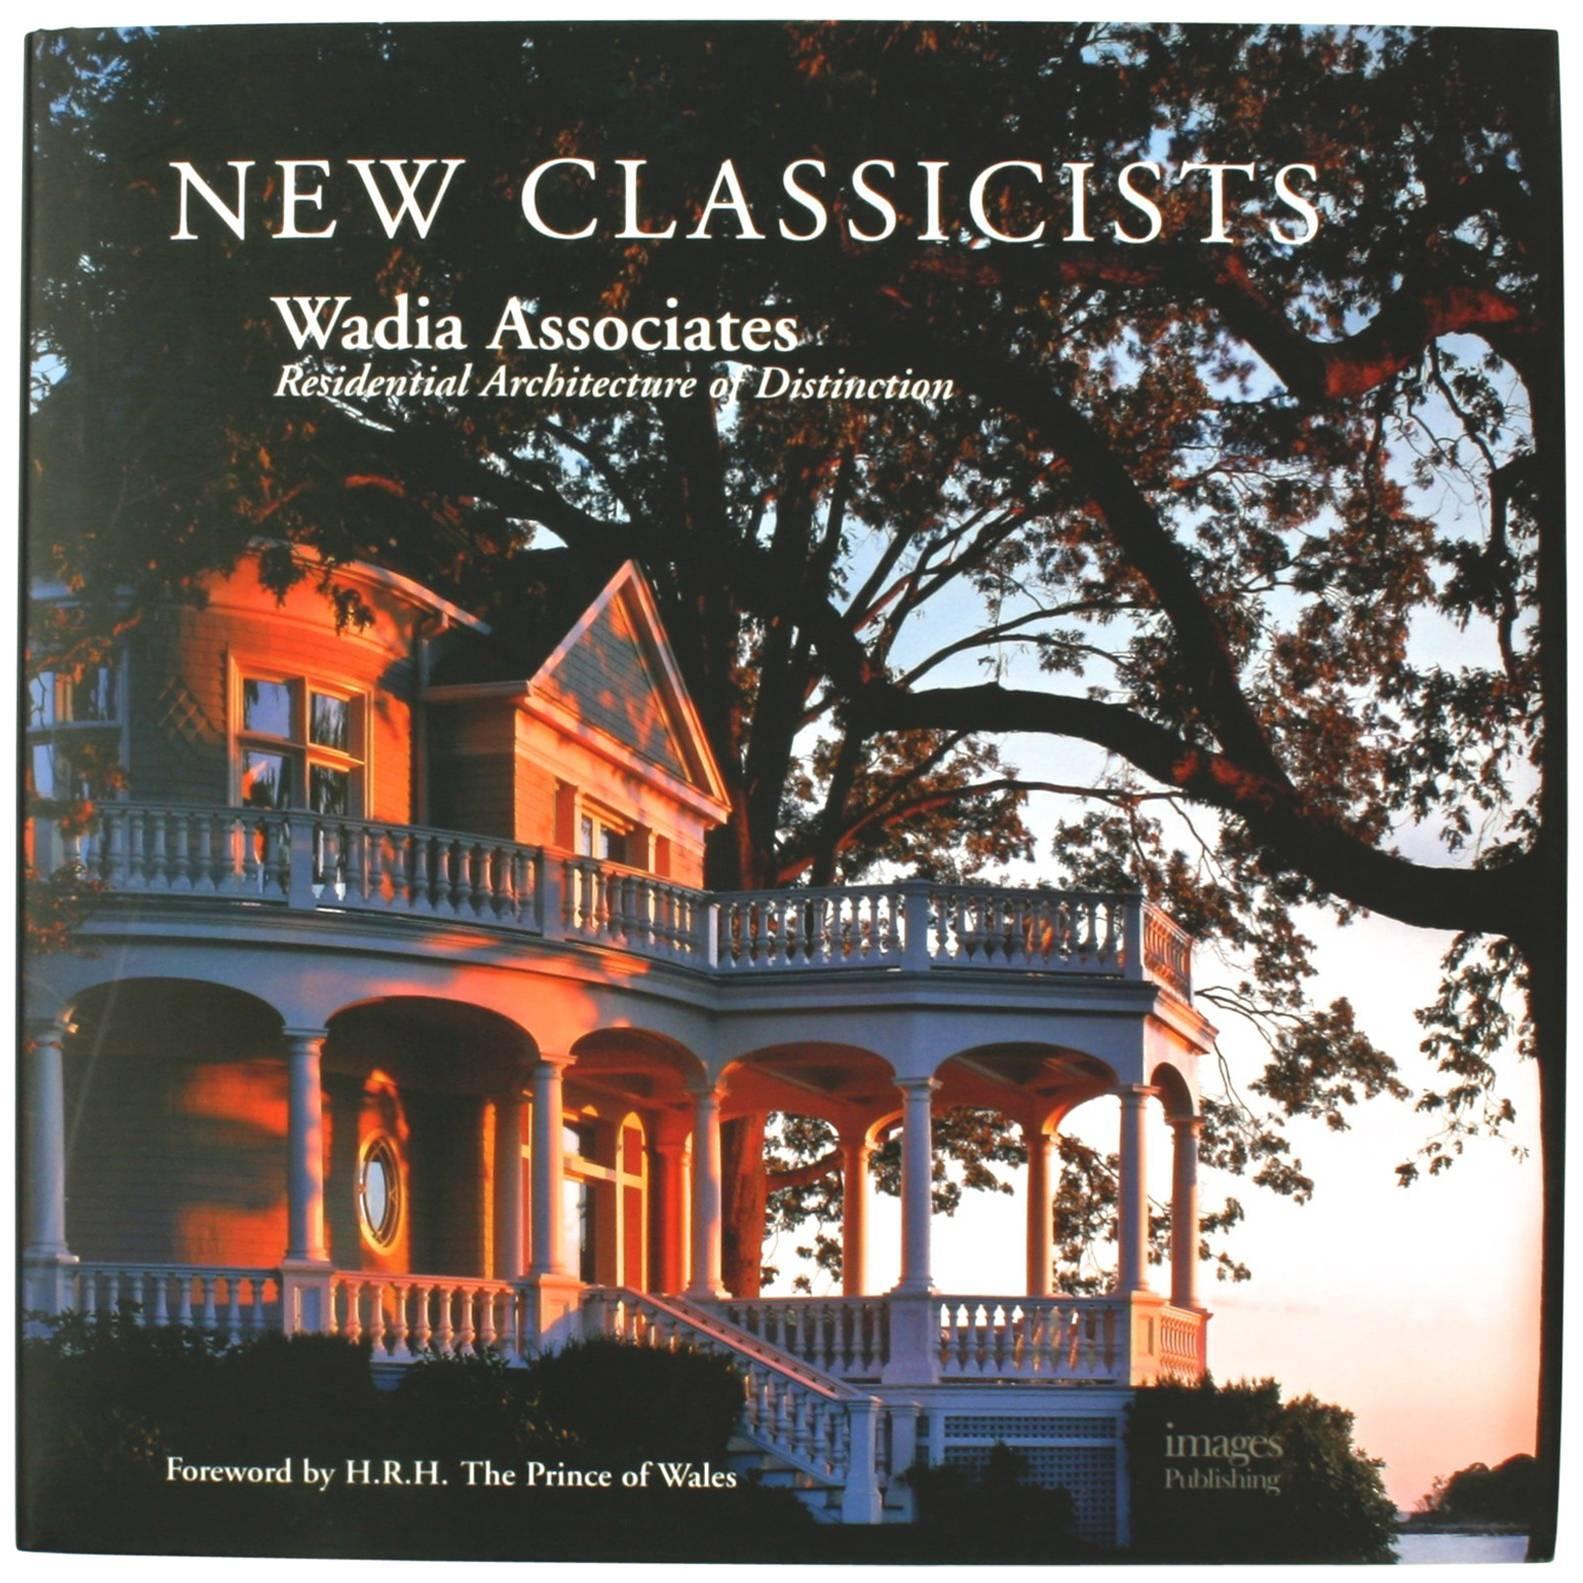 New Classicists Wadia Associates, Residential Architecture of Distinction For Sale